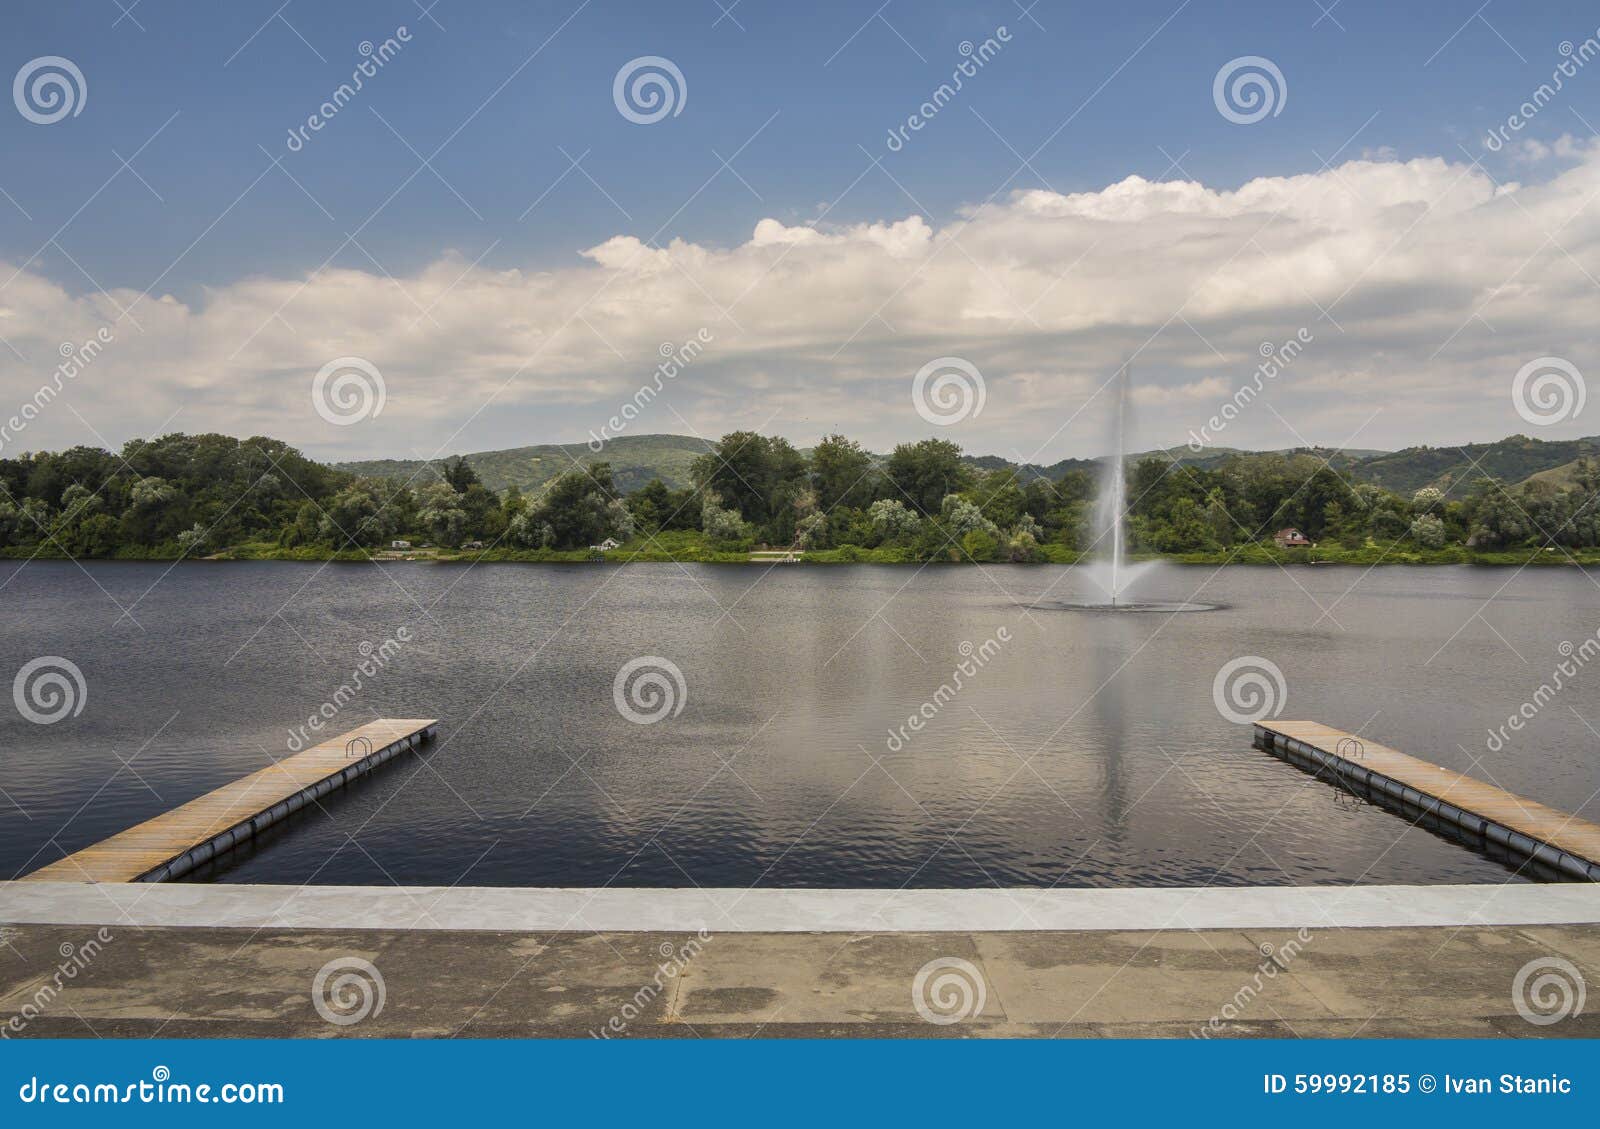 beautiful view of silver lake with two wooden piers and fountain